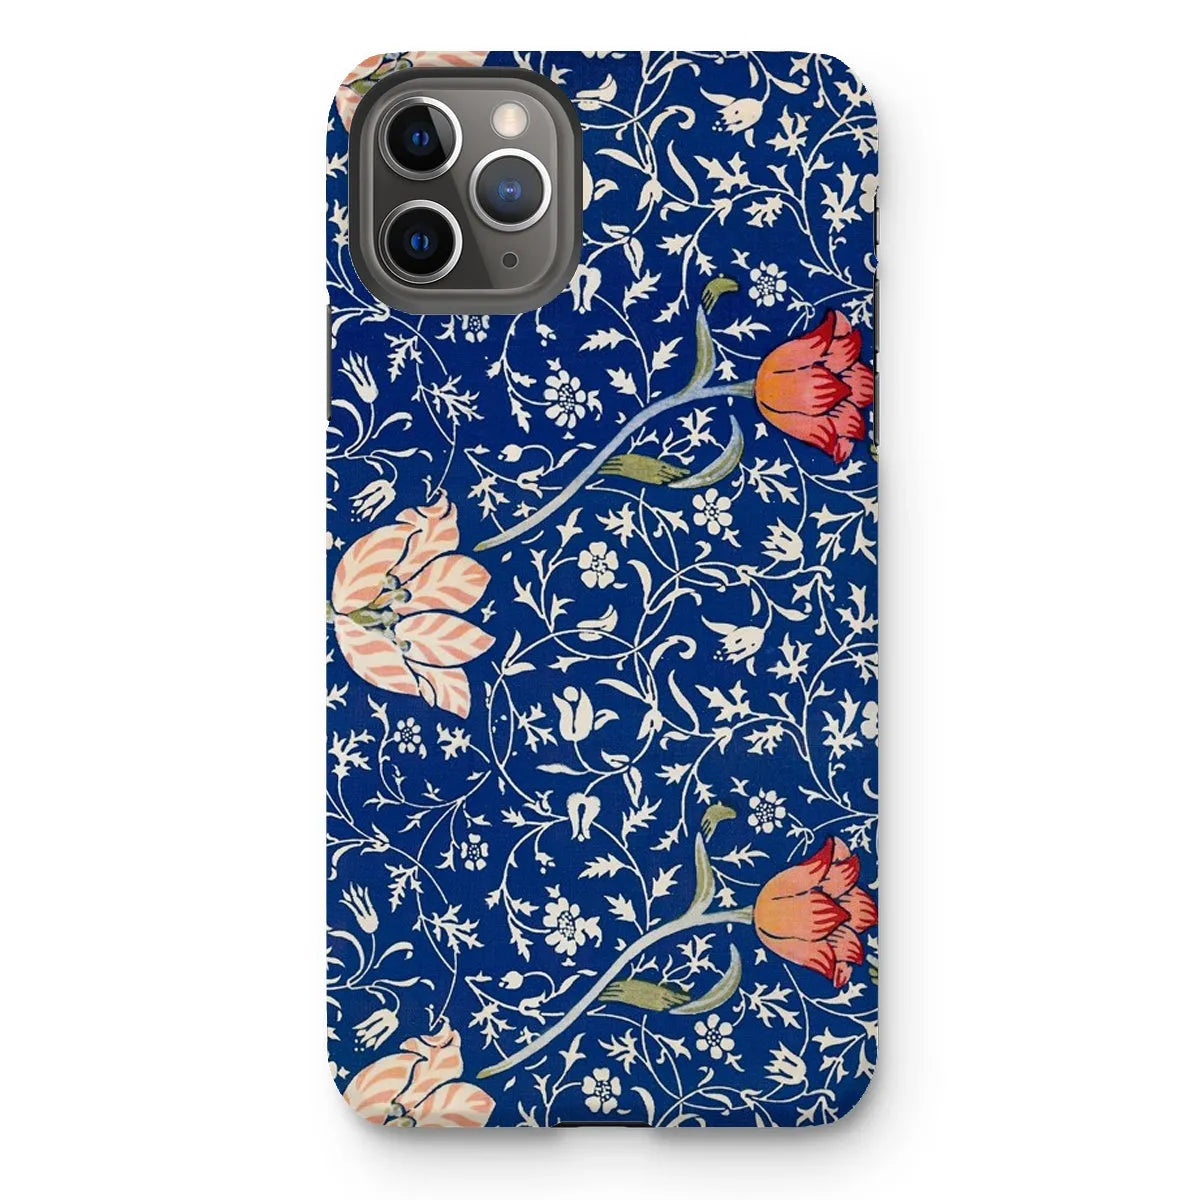 Medway - Floral Aesthetic Art Phone Case - William Morris - Iphone 11 Pro Max / Matte - Mobile Phone Cases - Aesthetic